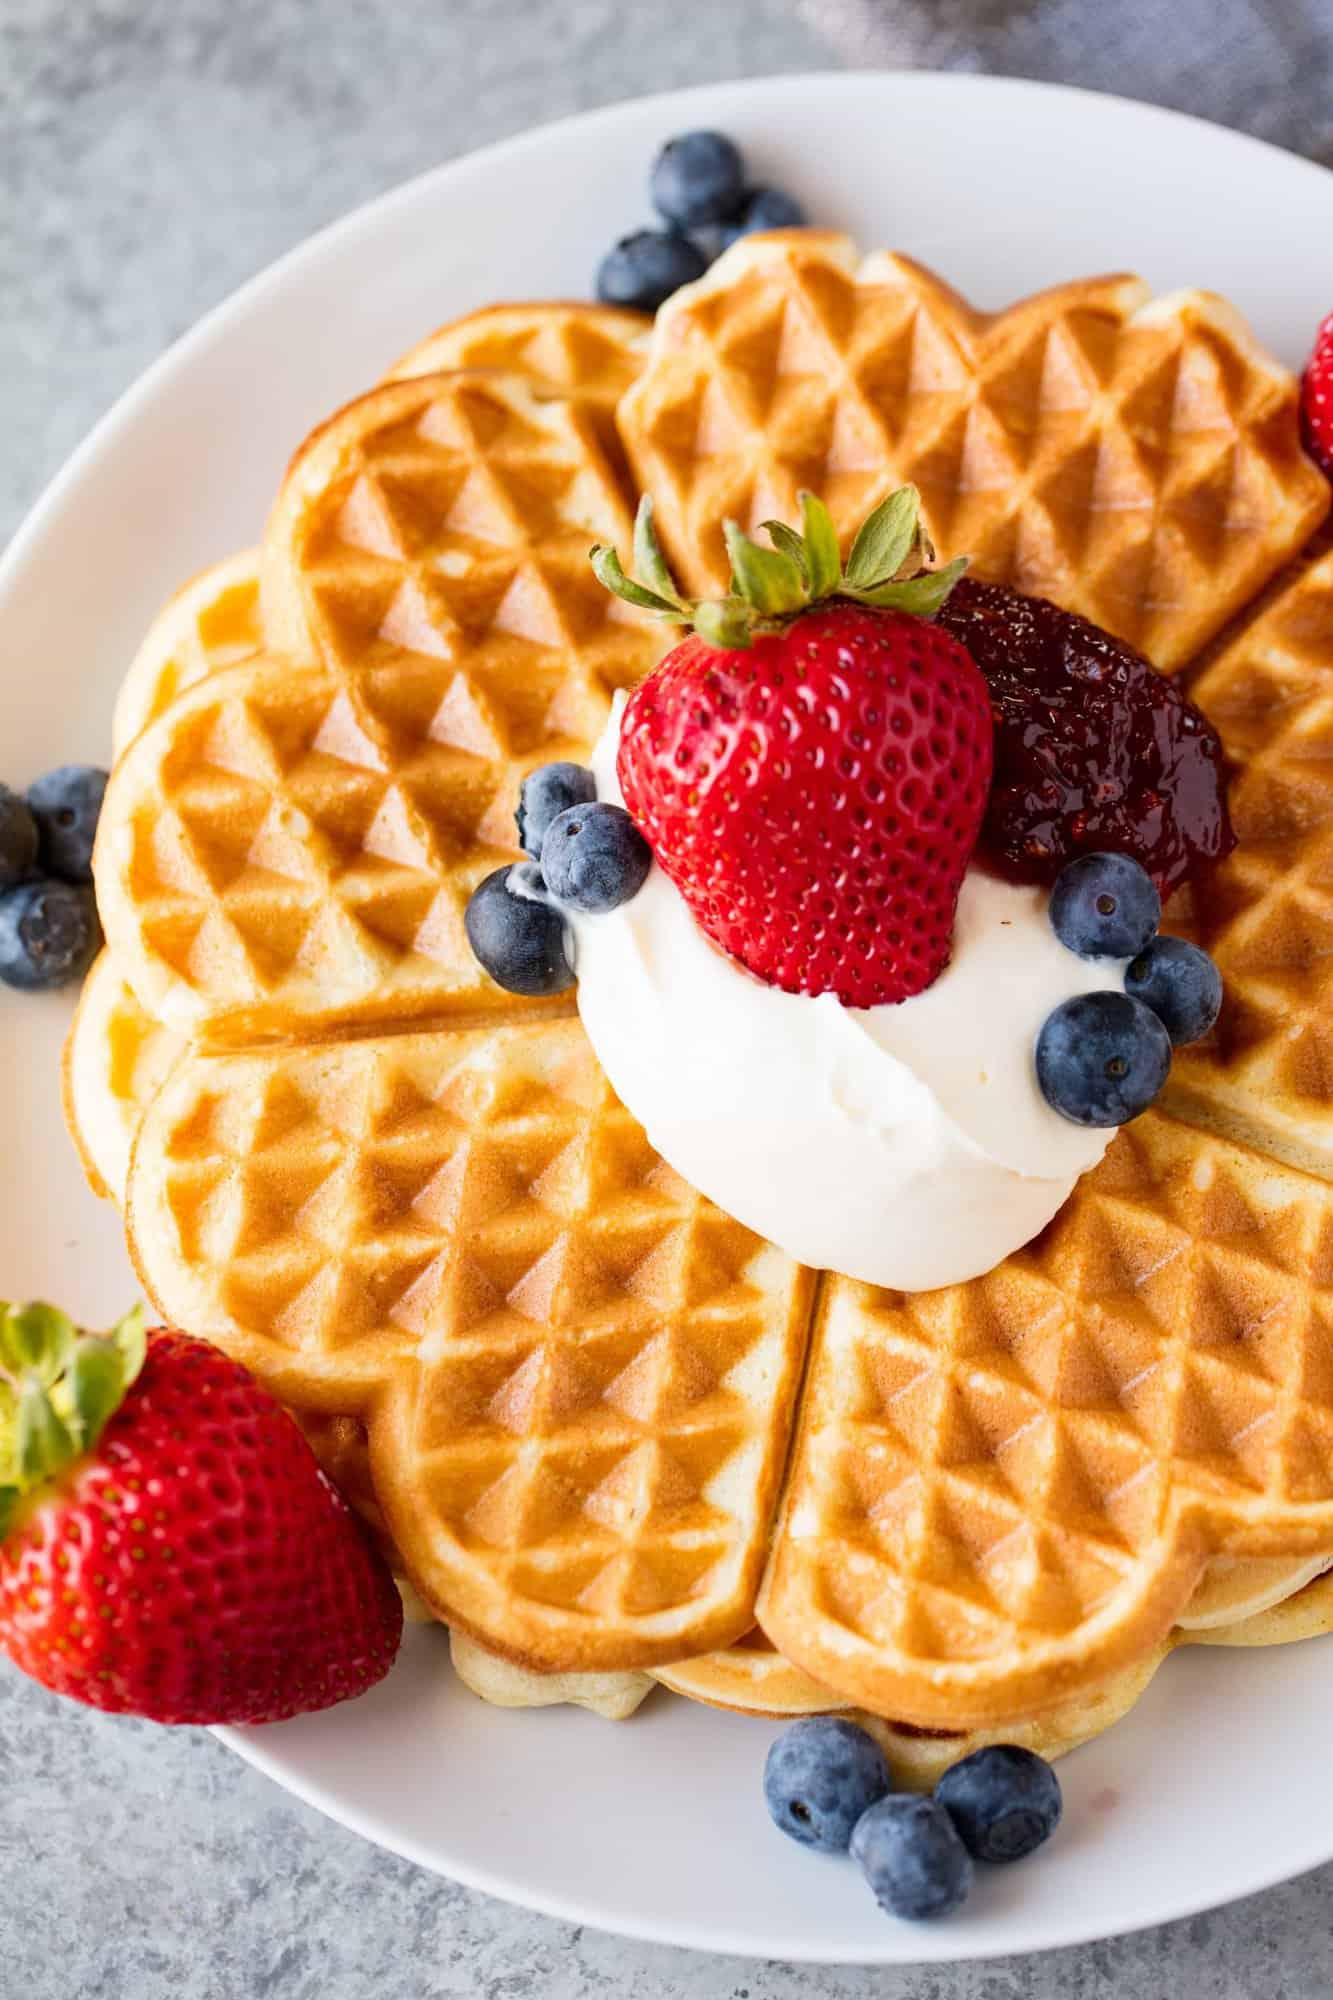 Easy Norwegian Waffles are sweet, crisp, and perfectly delicious. These heart shaped waffles are an amazing breakfast or dessert.